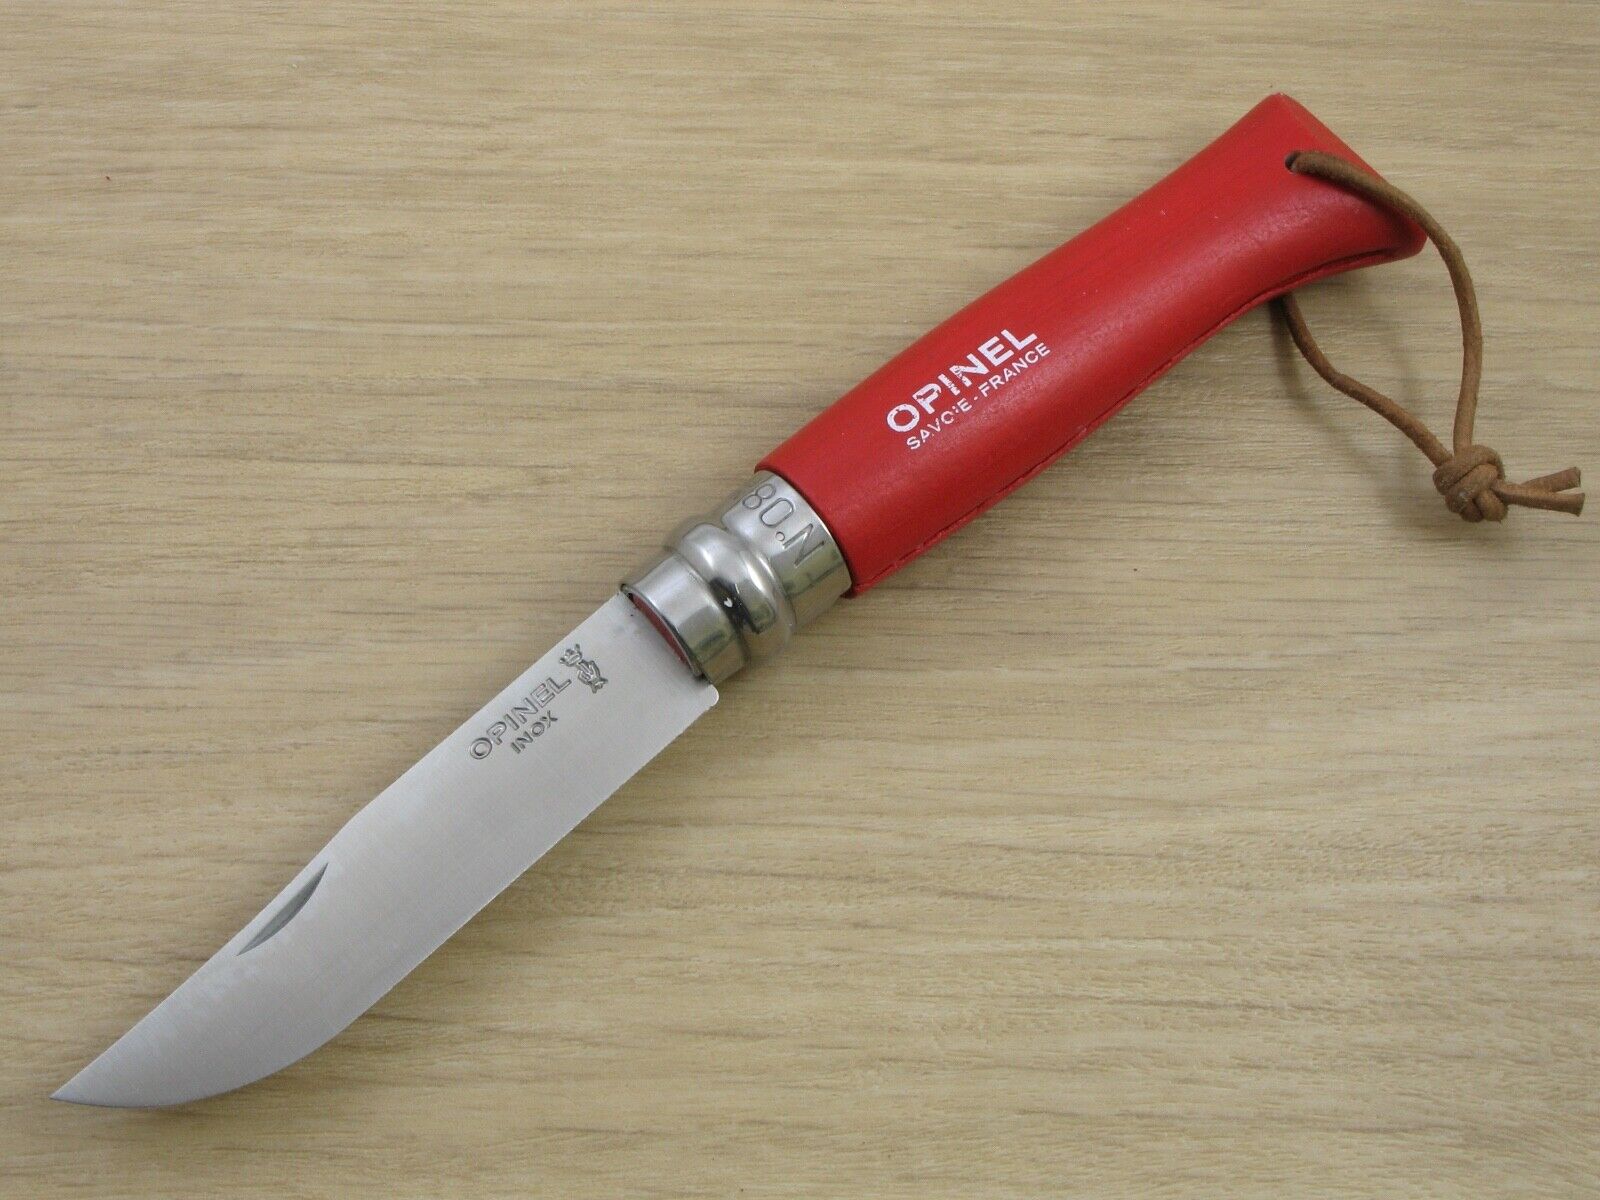 Opinel No. 08 Red INOX Stainless Steel Knife, Wood Handle, France - VT Creamery